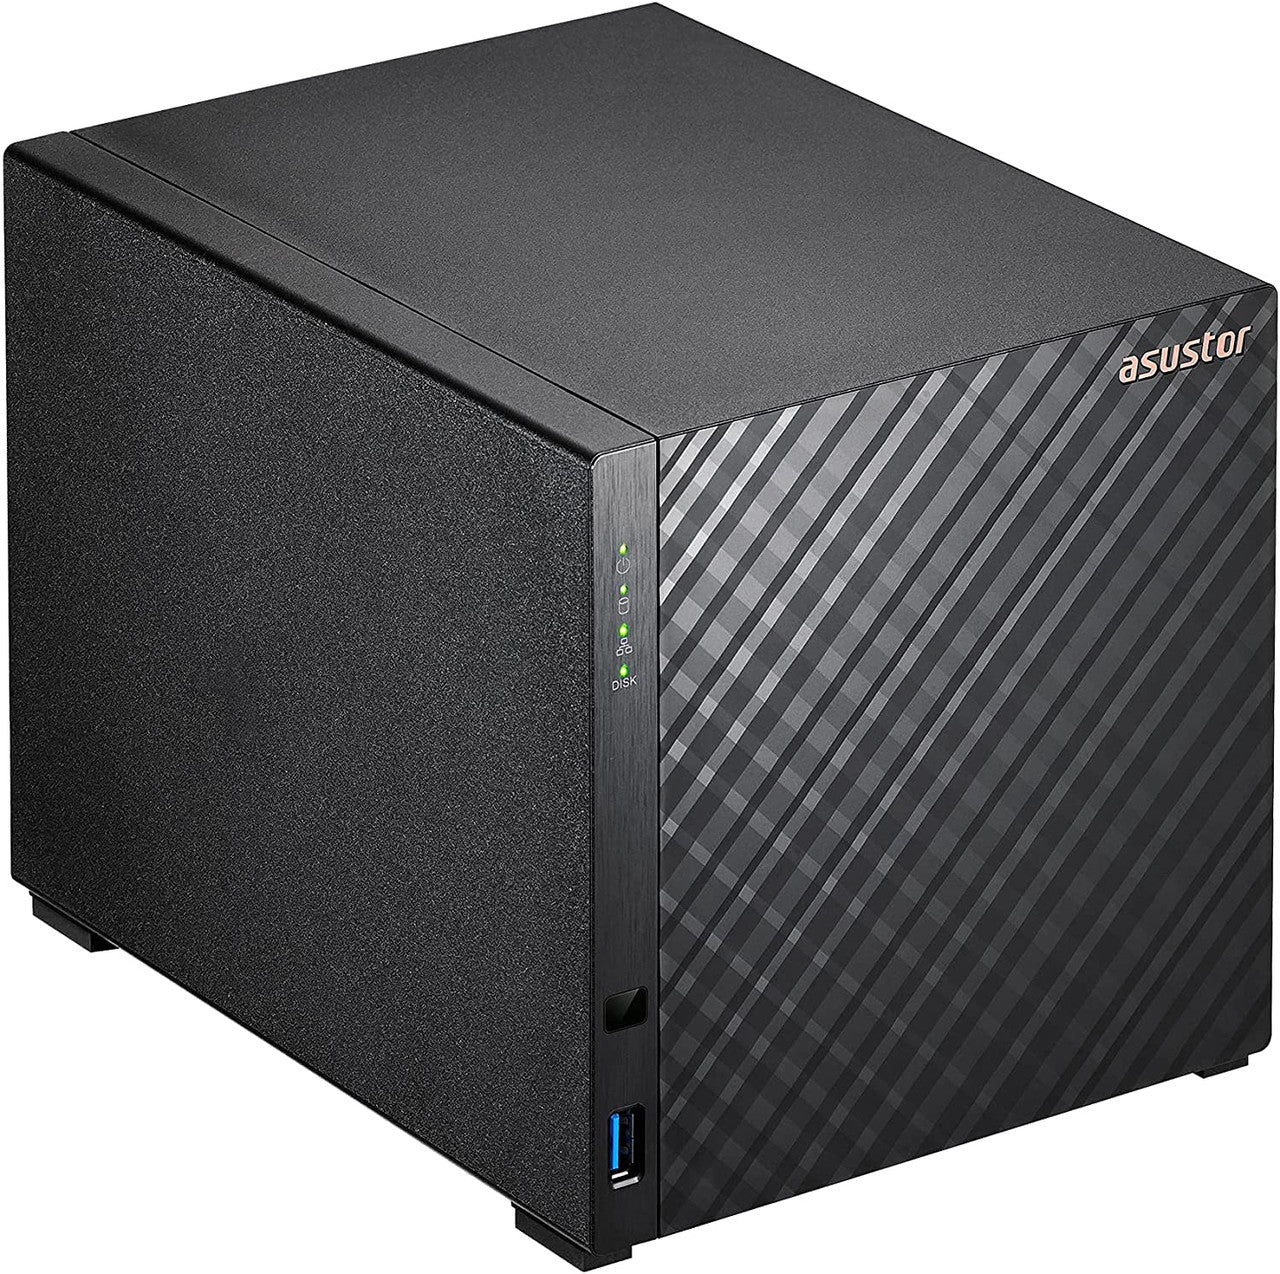 Asustor AS1104T 4-Bay Drivestor 4 NAS with 1GB RAM and 8TB (4x2TB) Seagate Ironwolf NAS Drives